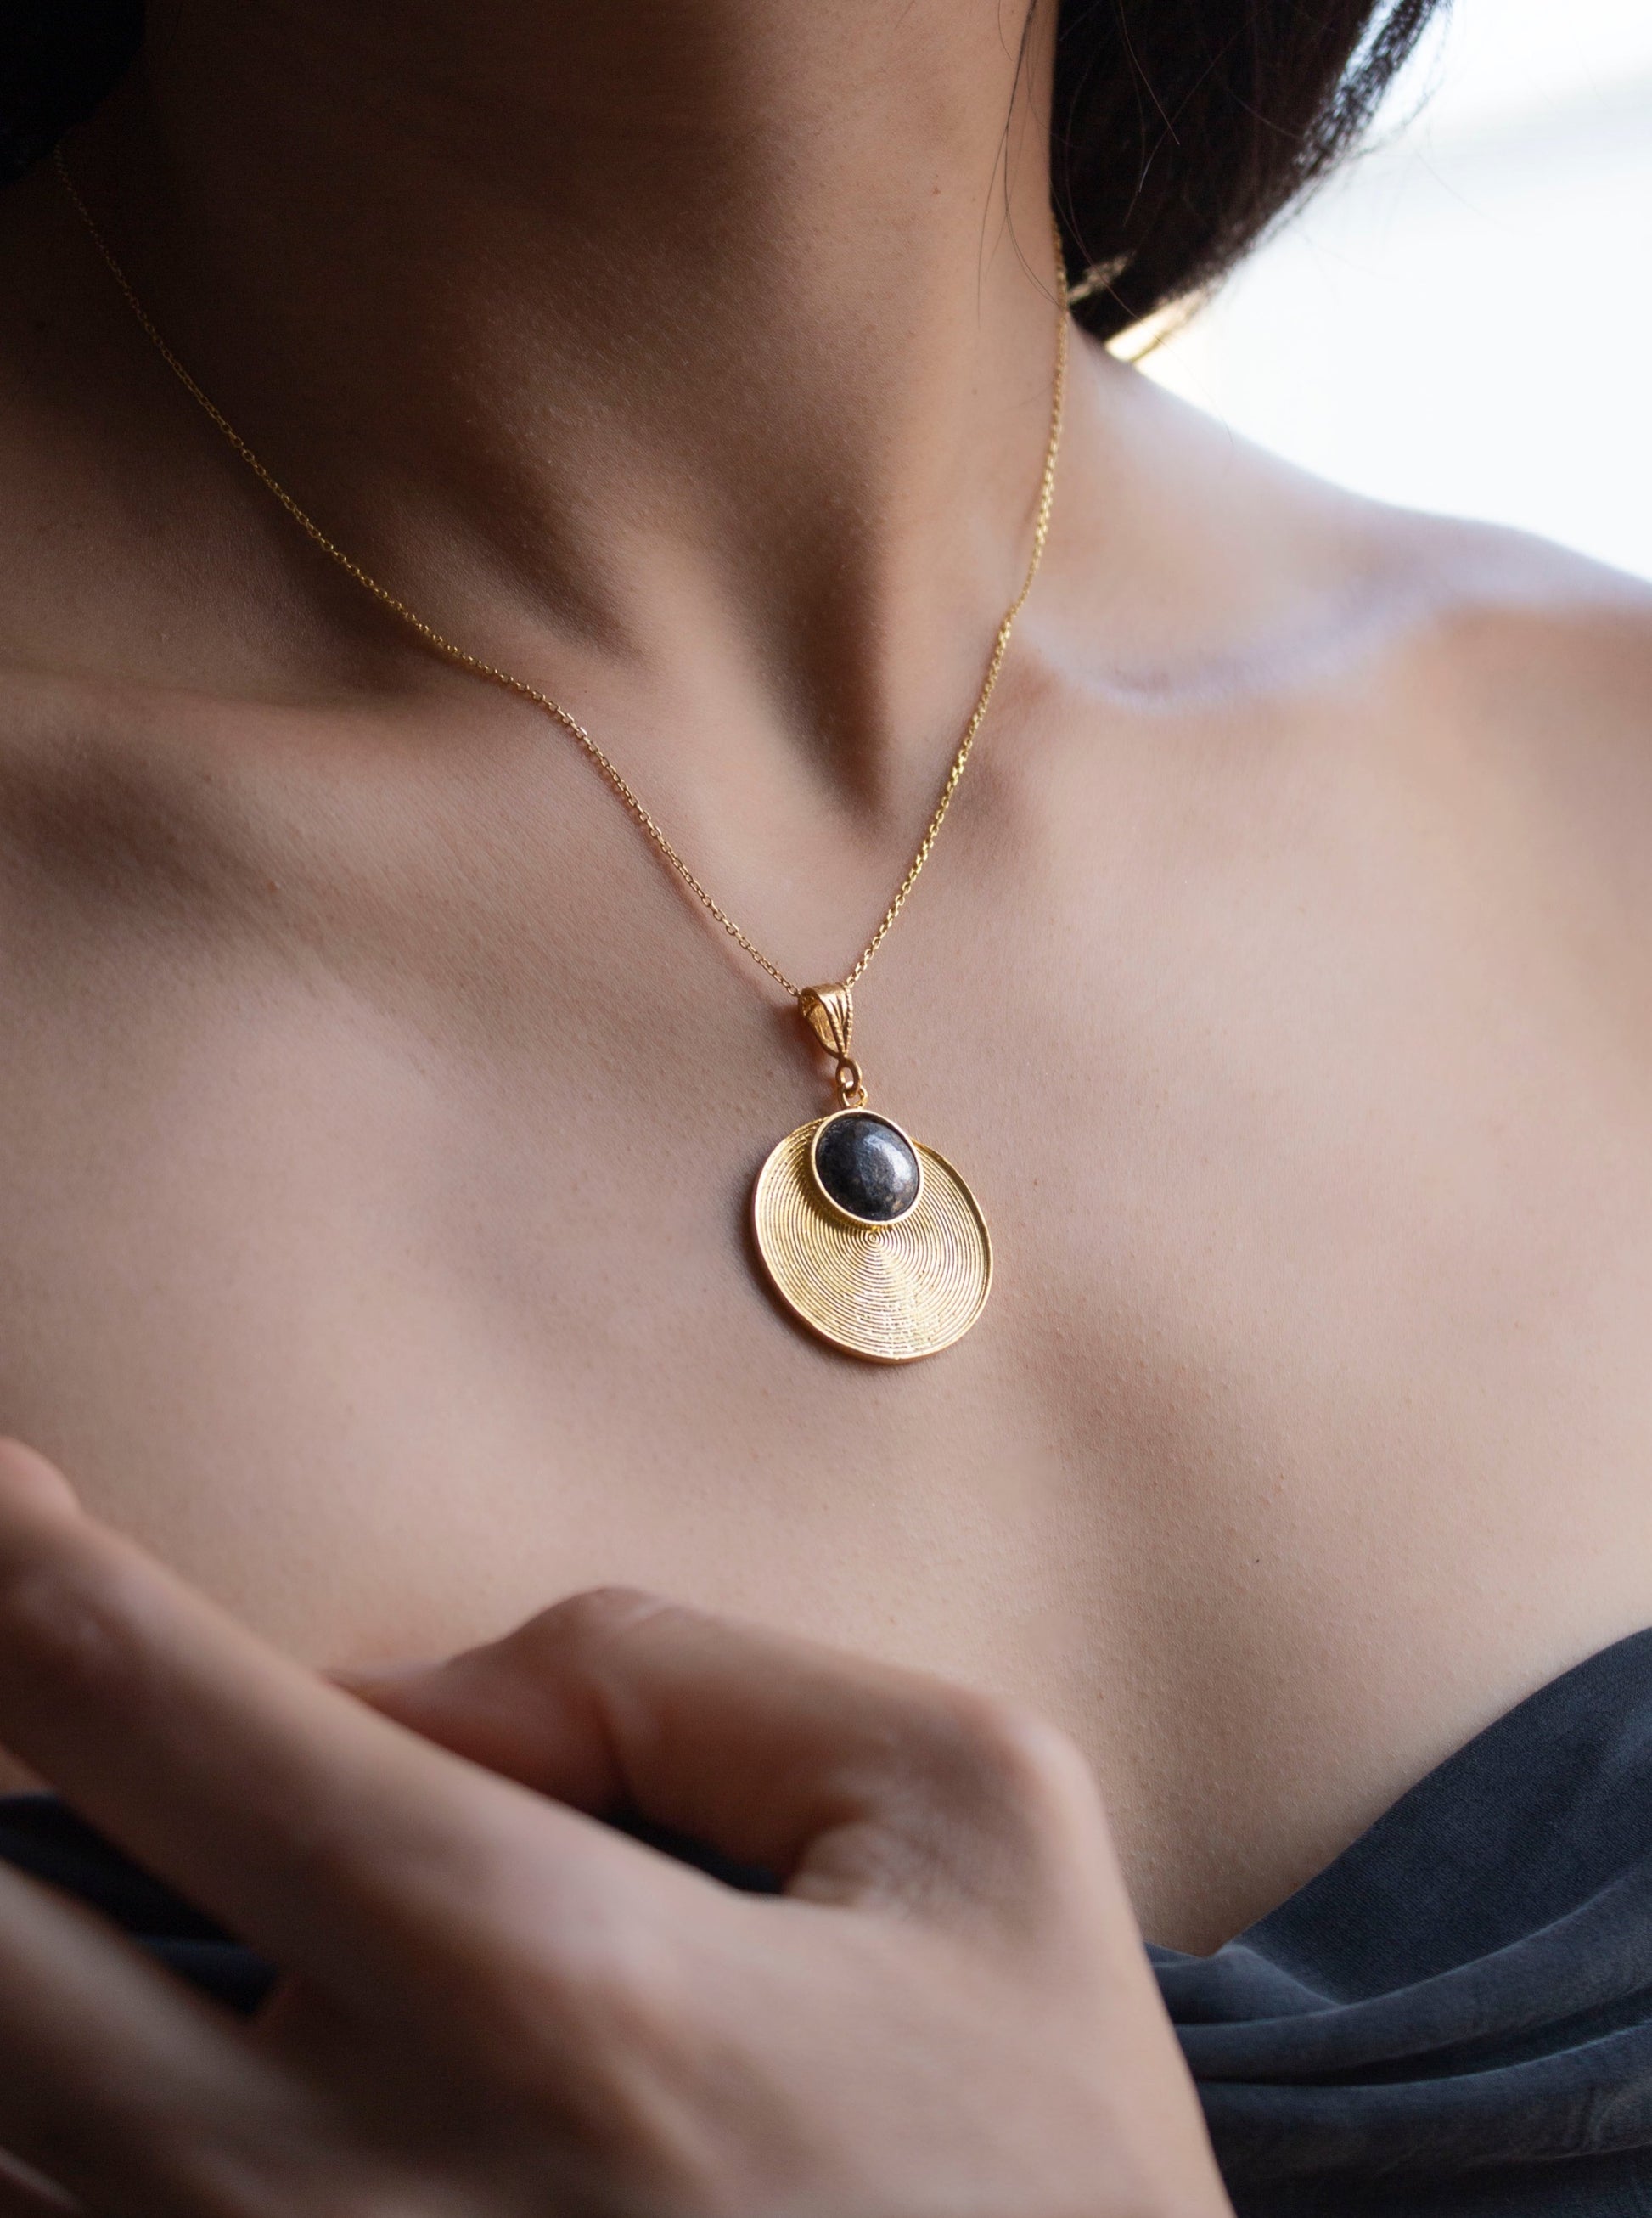 Girl wearing eclisse necklace, gold pendant with spiral forms and a circle oxidised piece